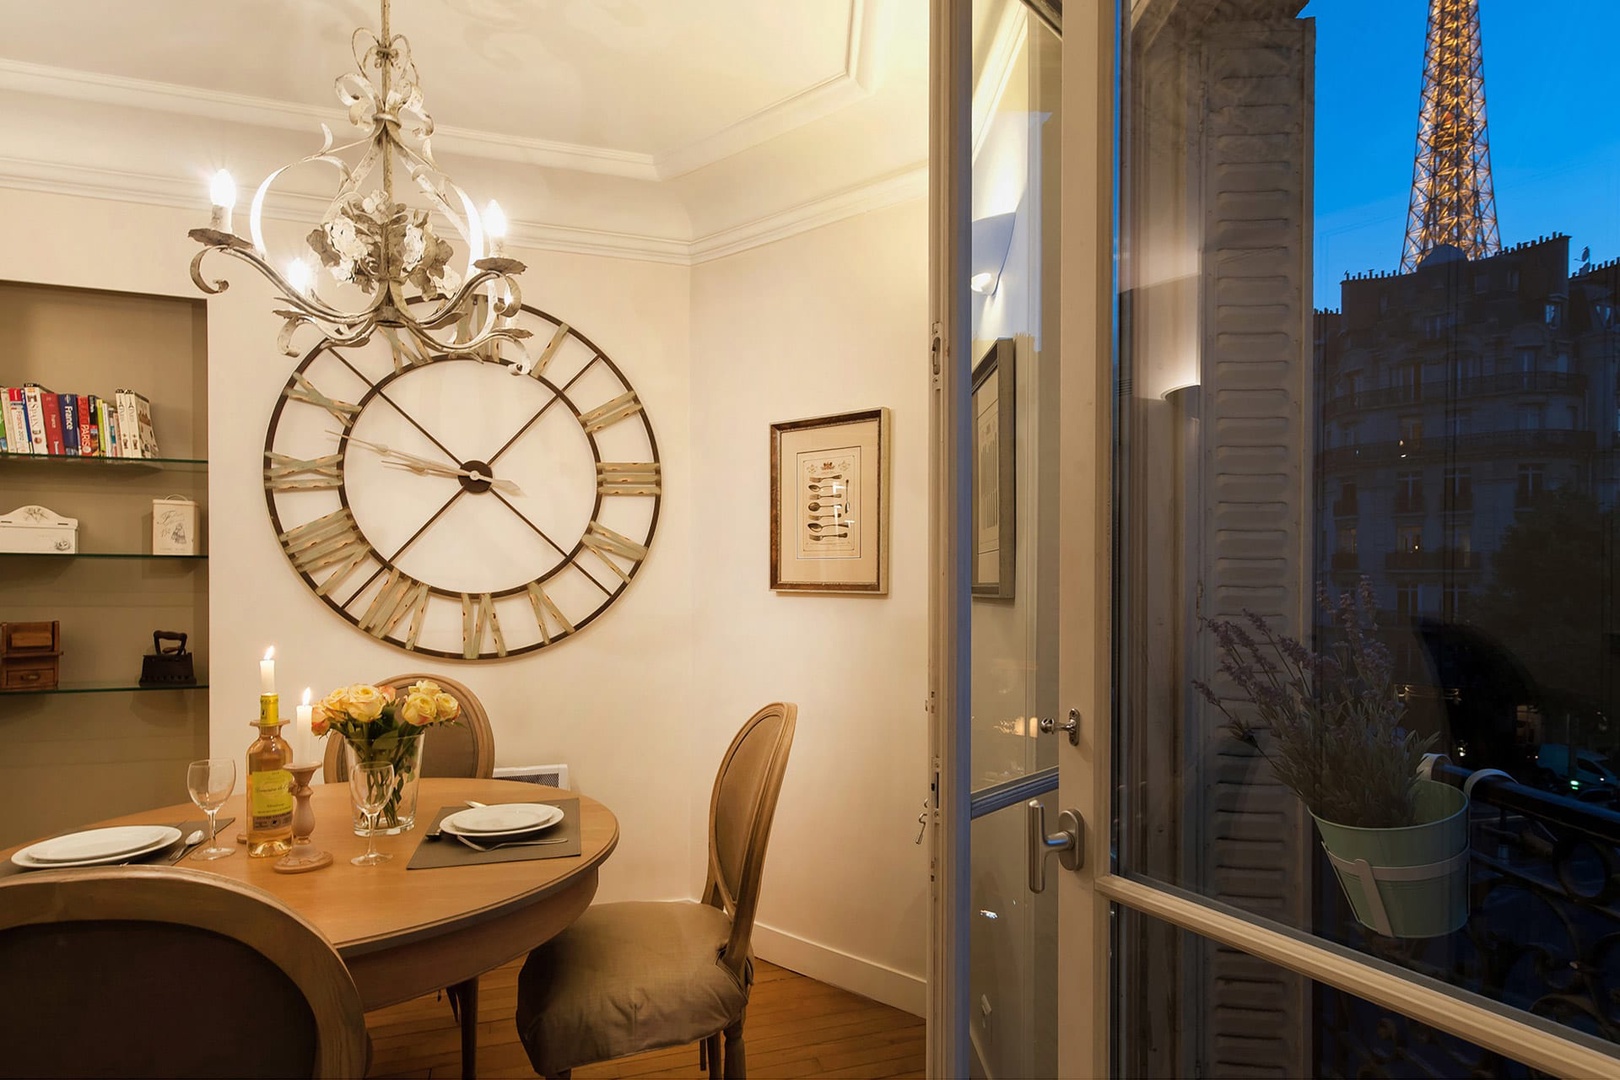 Enjoy stunning views of the Eiffel Tower from the kitchen.